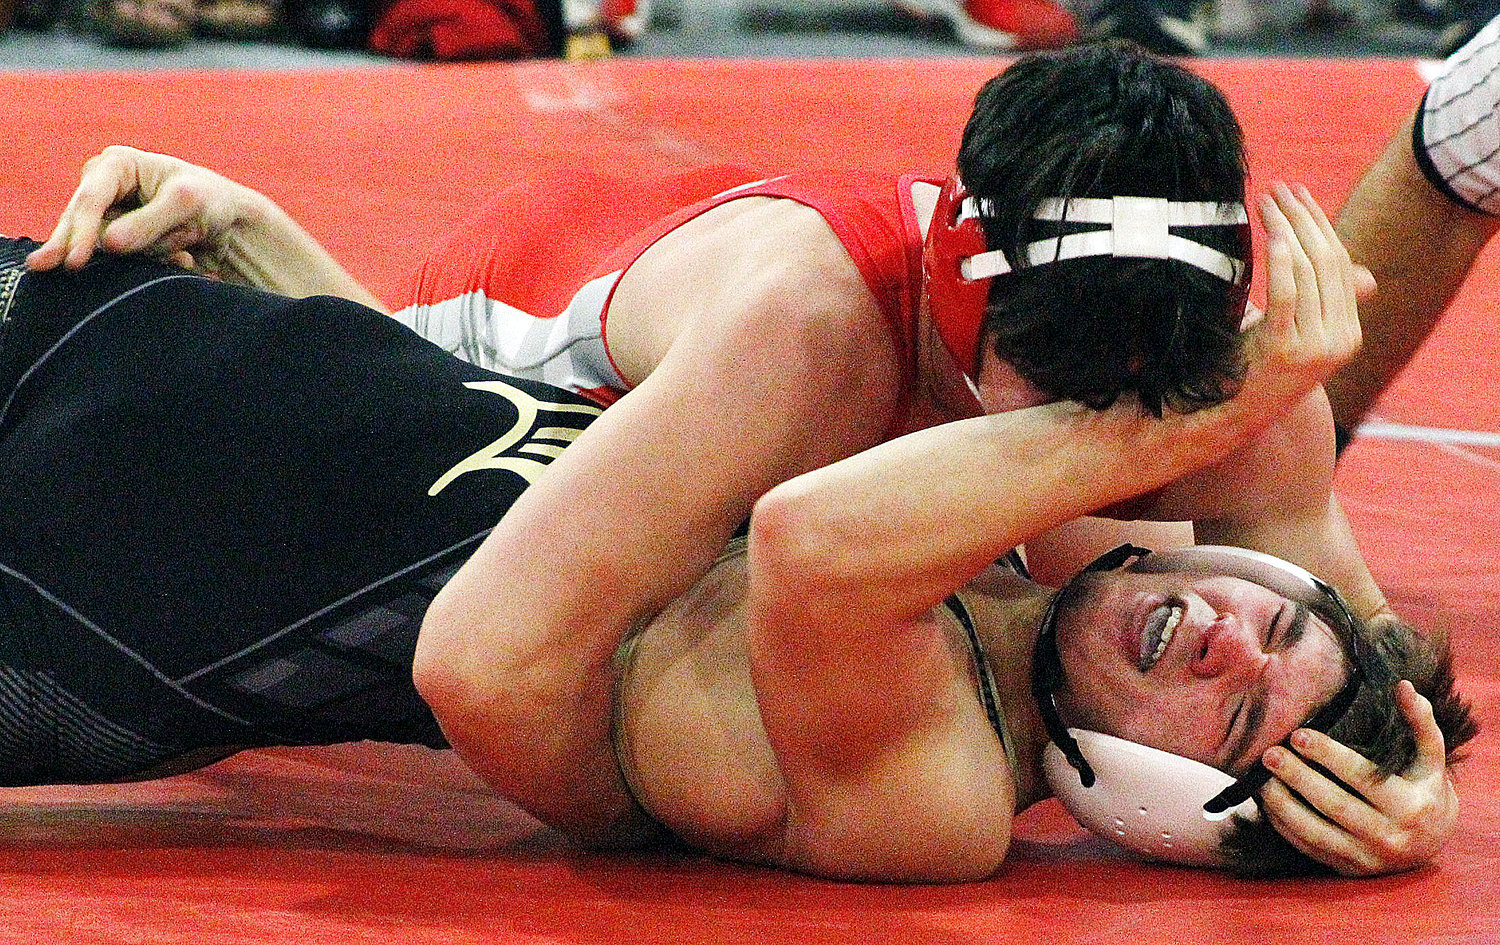 COLE CRAHAN doesn’t let up en route to a pin as his opponent shoves a forearm in his face.